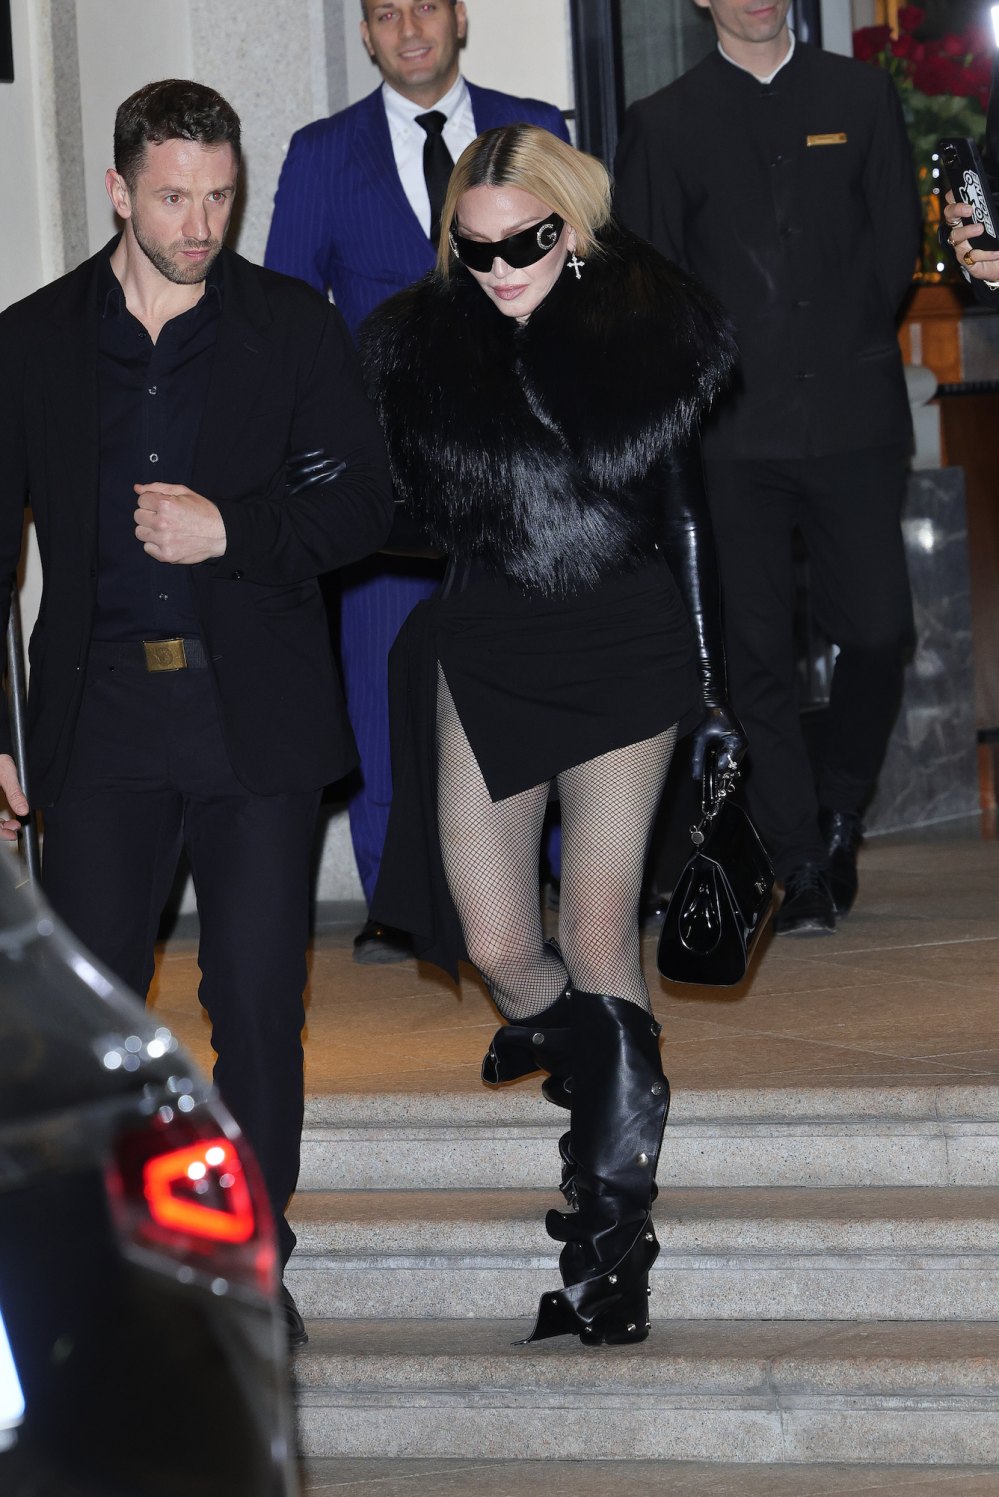 Madonna Steps Out in Fishnet Tights and Slouchy Boots in Milan After Celebration Tour Show